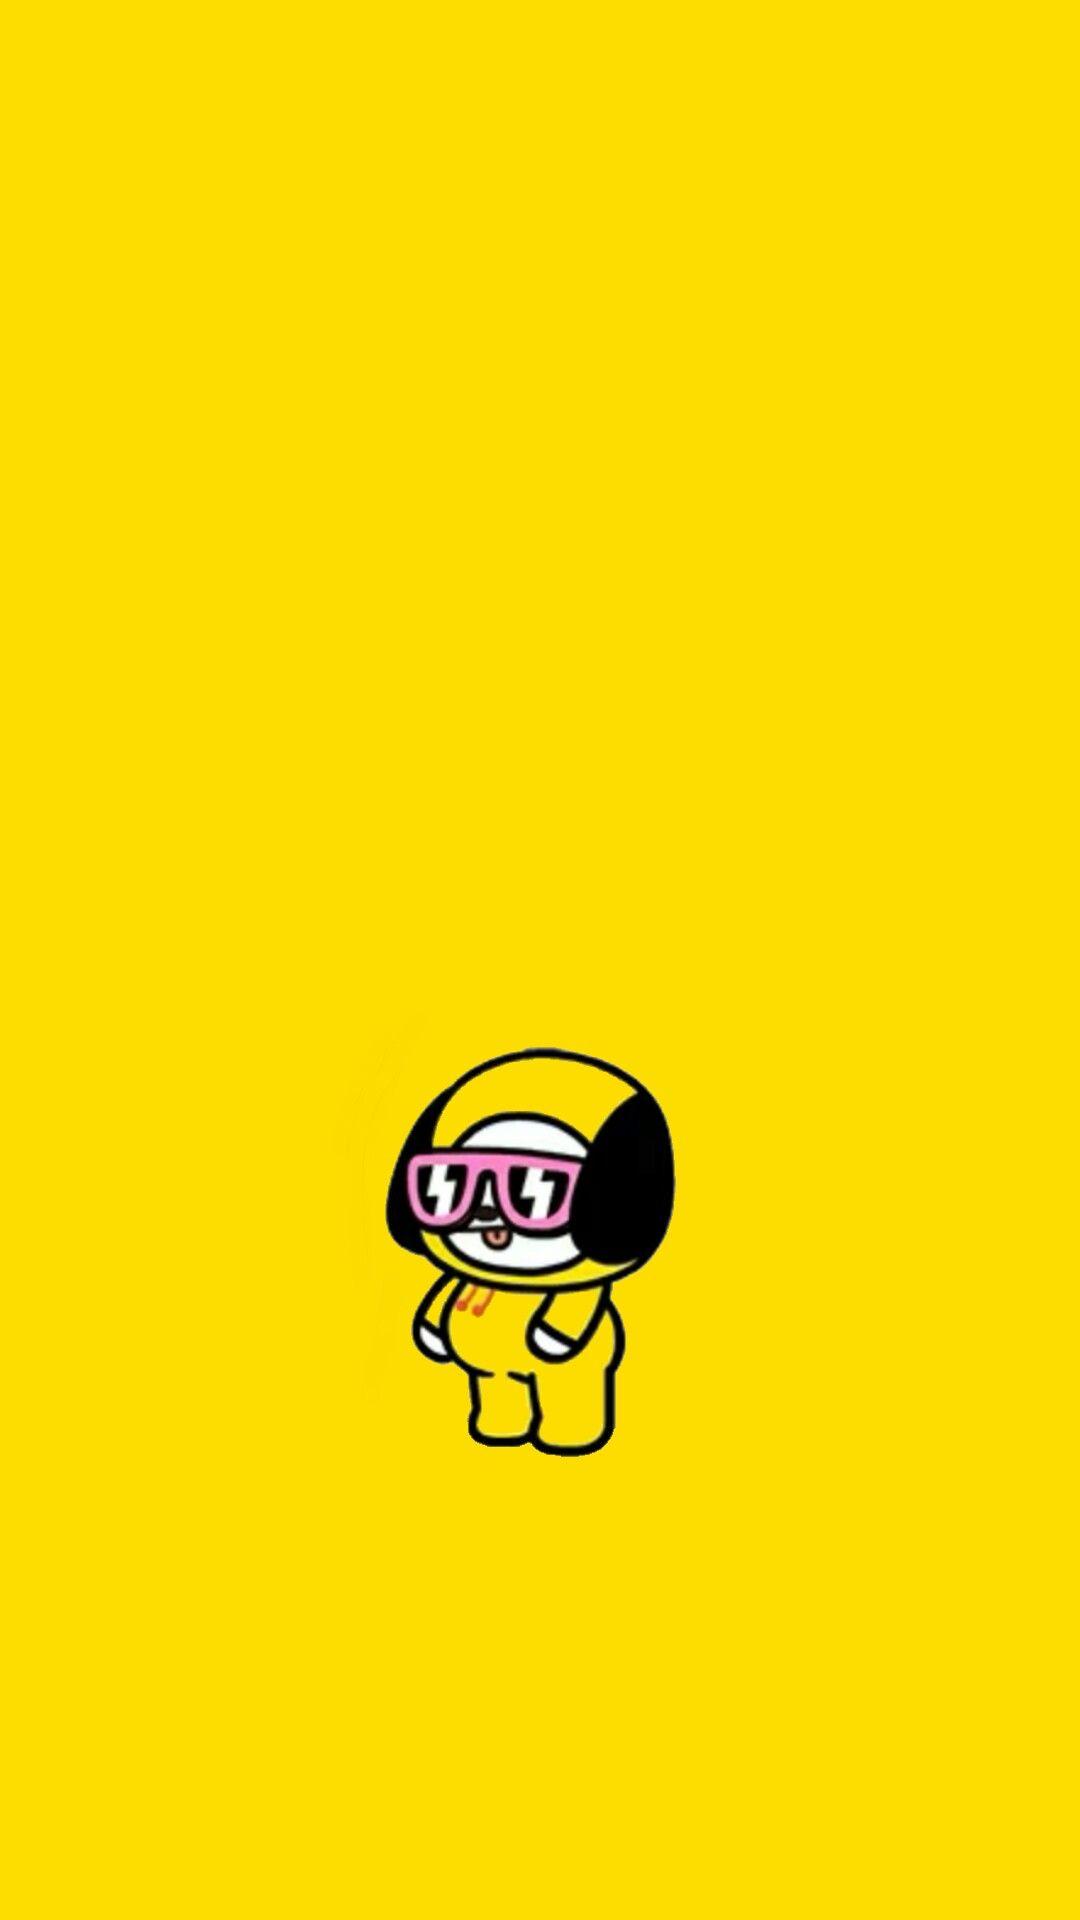 Bt21 Chimmy Wallpapers Wallpaper Cave Choose from hundreds of free laptop wallpapers. bt21 chimmy wallpapers wallpaper cave